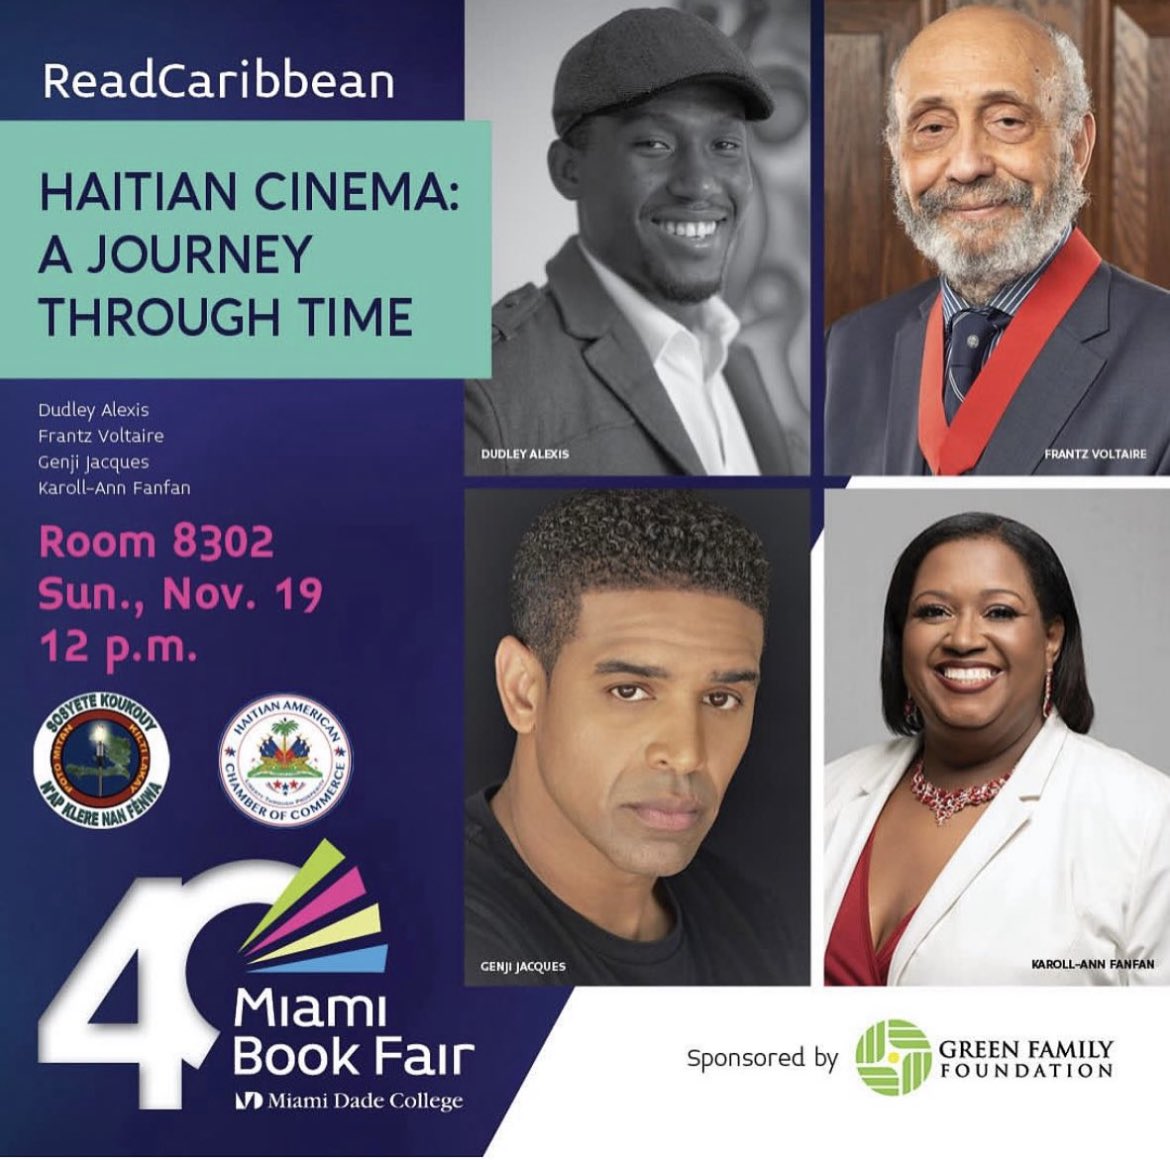 On November 19, spend your Sunday exploring Haitian cinema at the #MiamiBookFair’s ReadCaribbean event. « Haitian Cinema: A Journey Through Time » starts at 12 pm. Don’t miss this chance to delve into a world of cultural storytelling. § ~ #ReadCaribbean  @MiamiBookFair